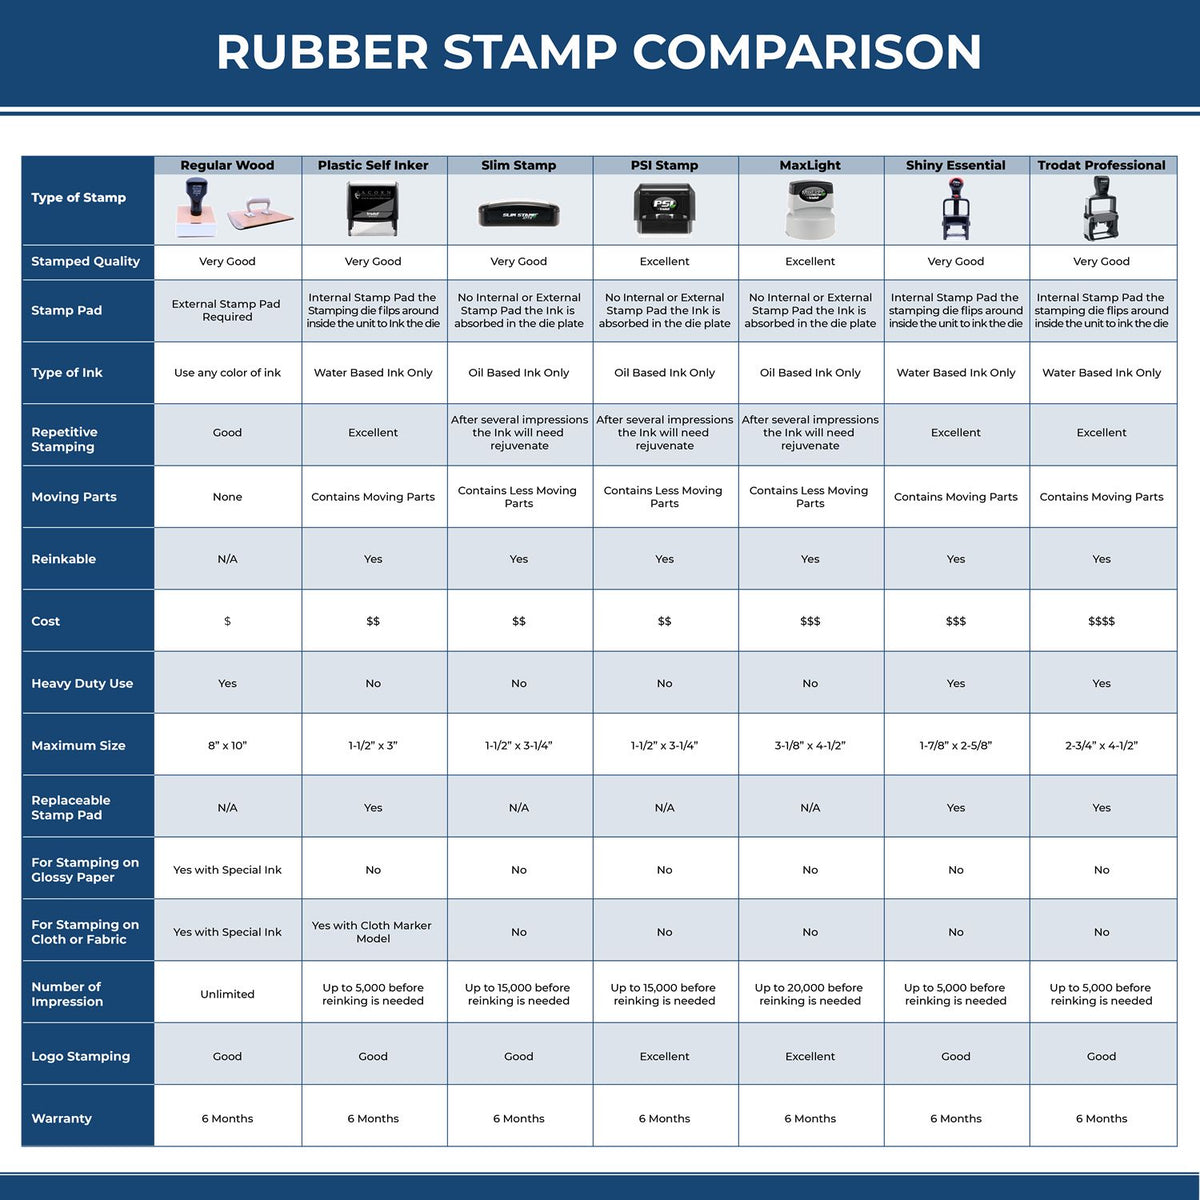 Large Self-Inking Asymptomatic Stamp 4997S Rubber Stamp Comparison